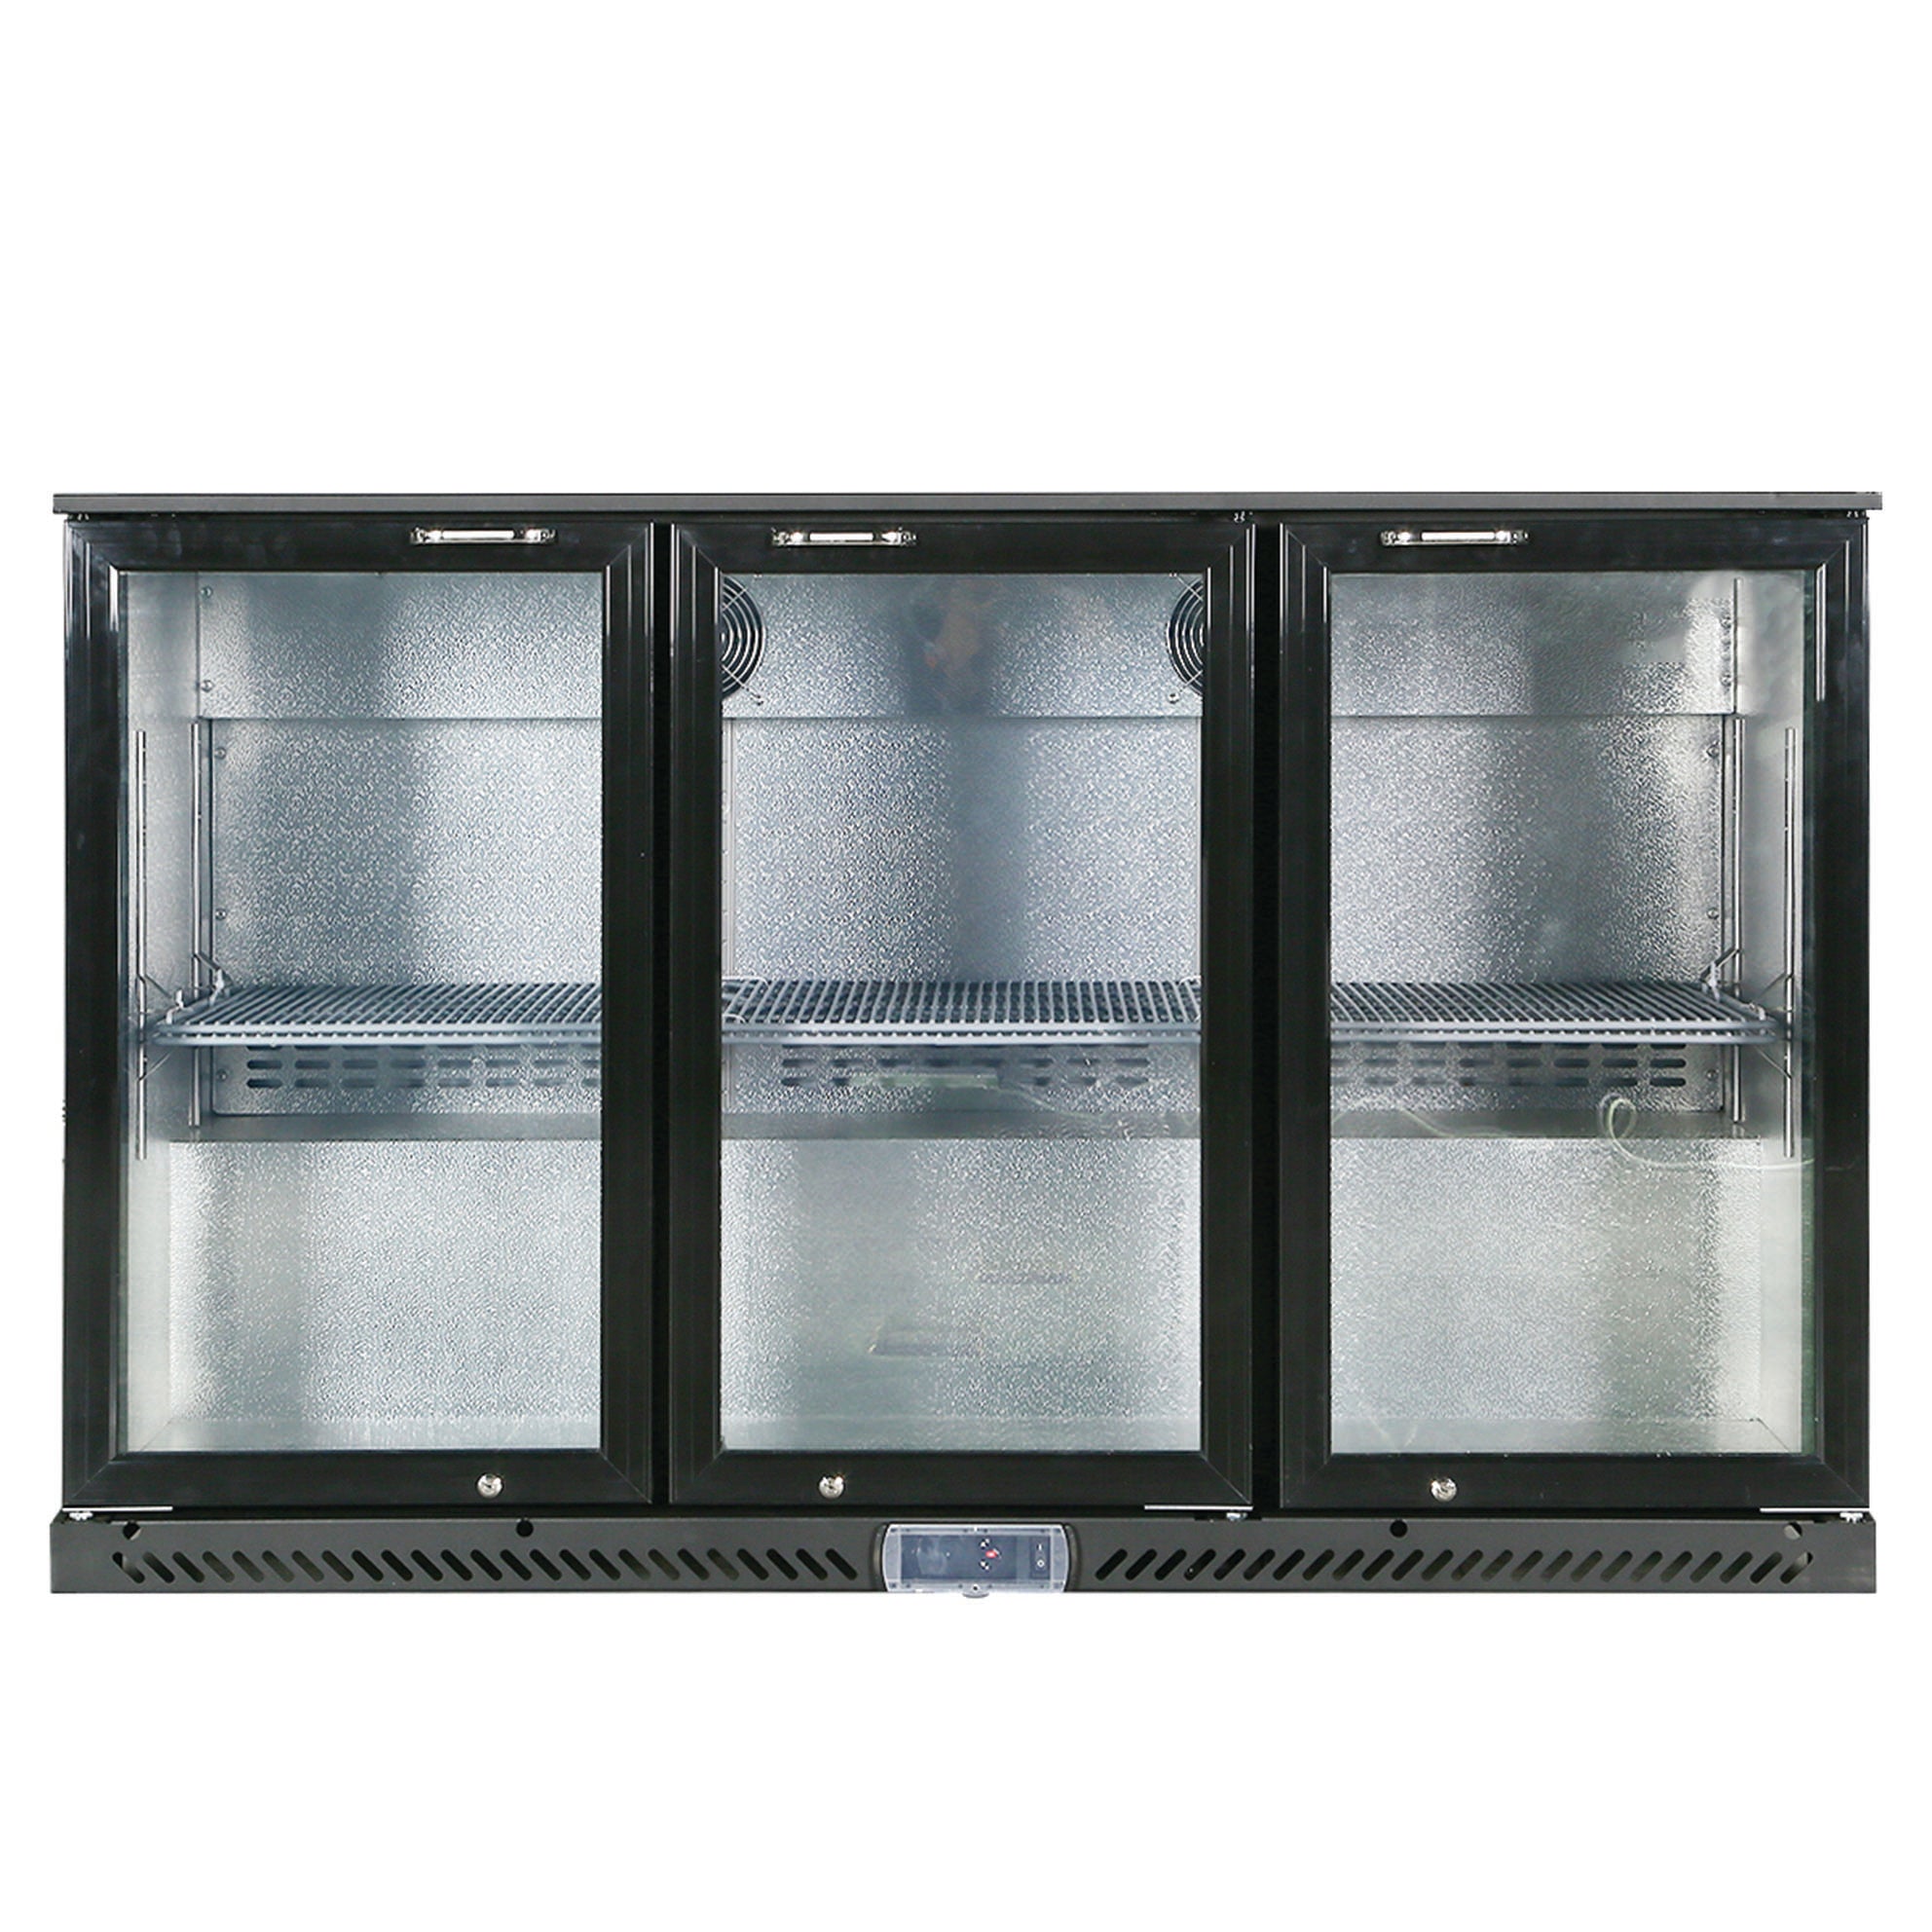 Chef AAA - BC-350, Commercial 53" Glass Door Back Bar Refrigerator 9 cu.ft capacity